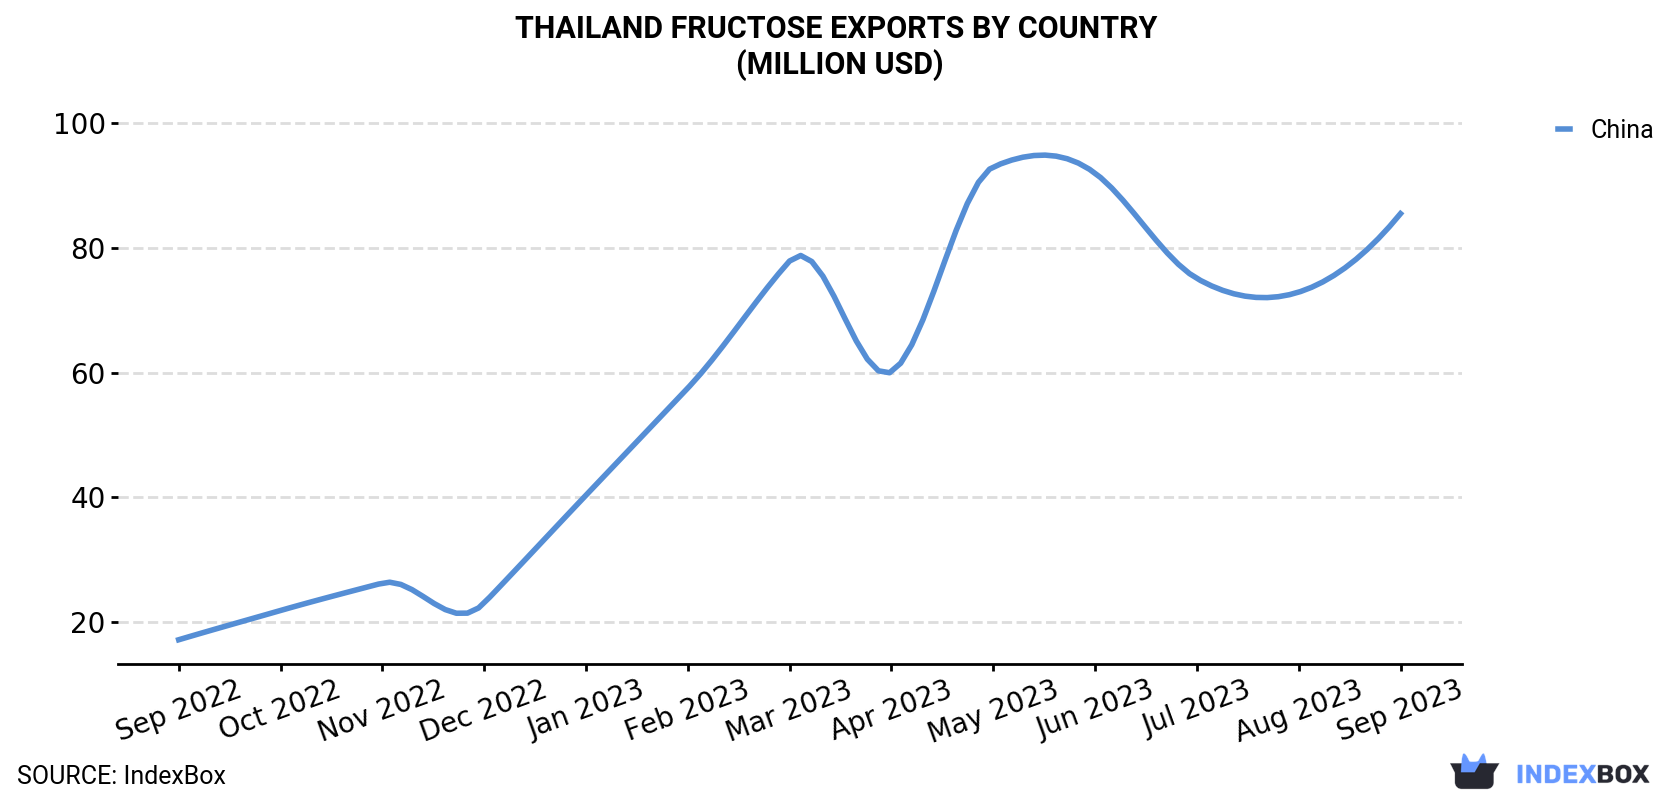 Thailand Fructose Exports By Country (Million USD)